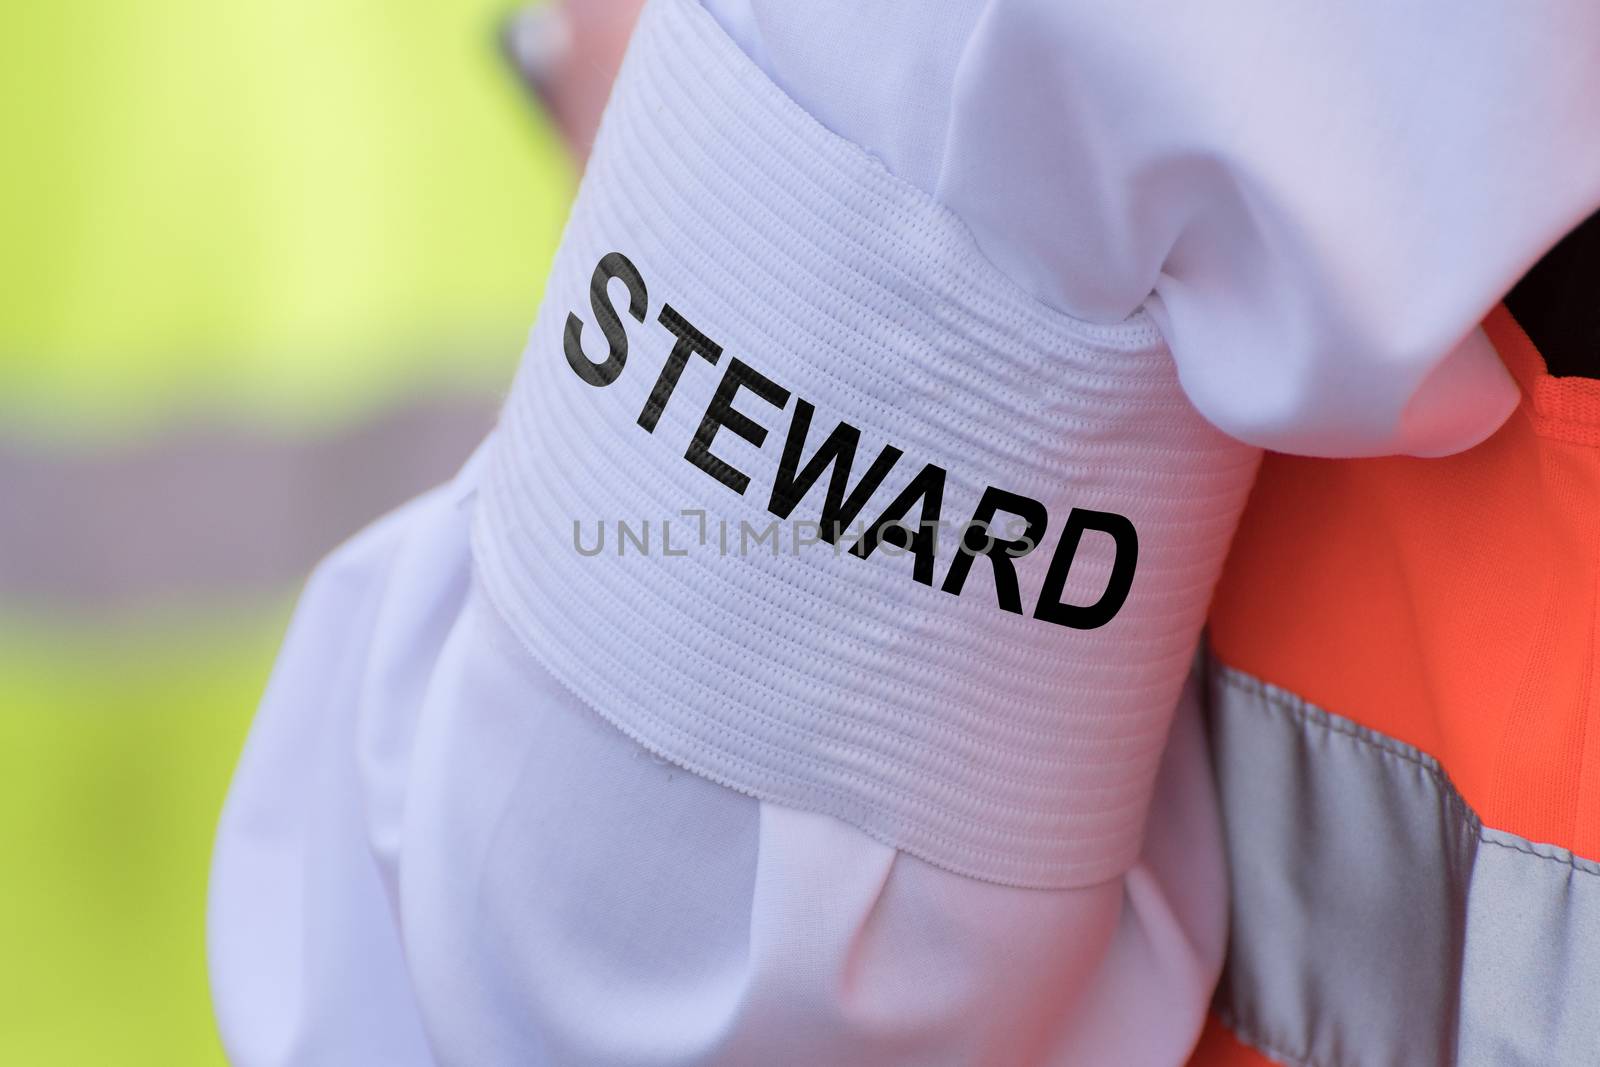 Detail of an armband with text "STEWARD" by w20er